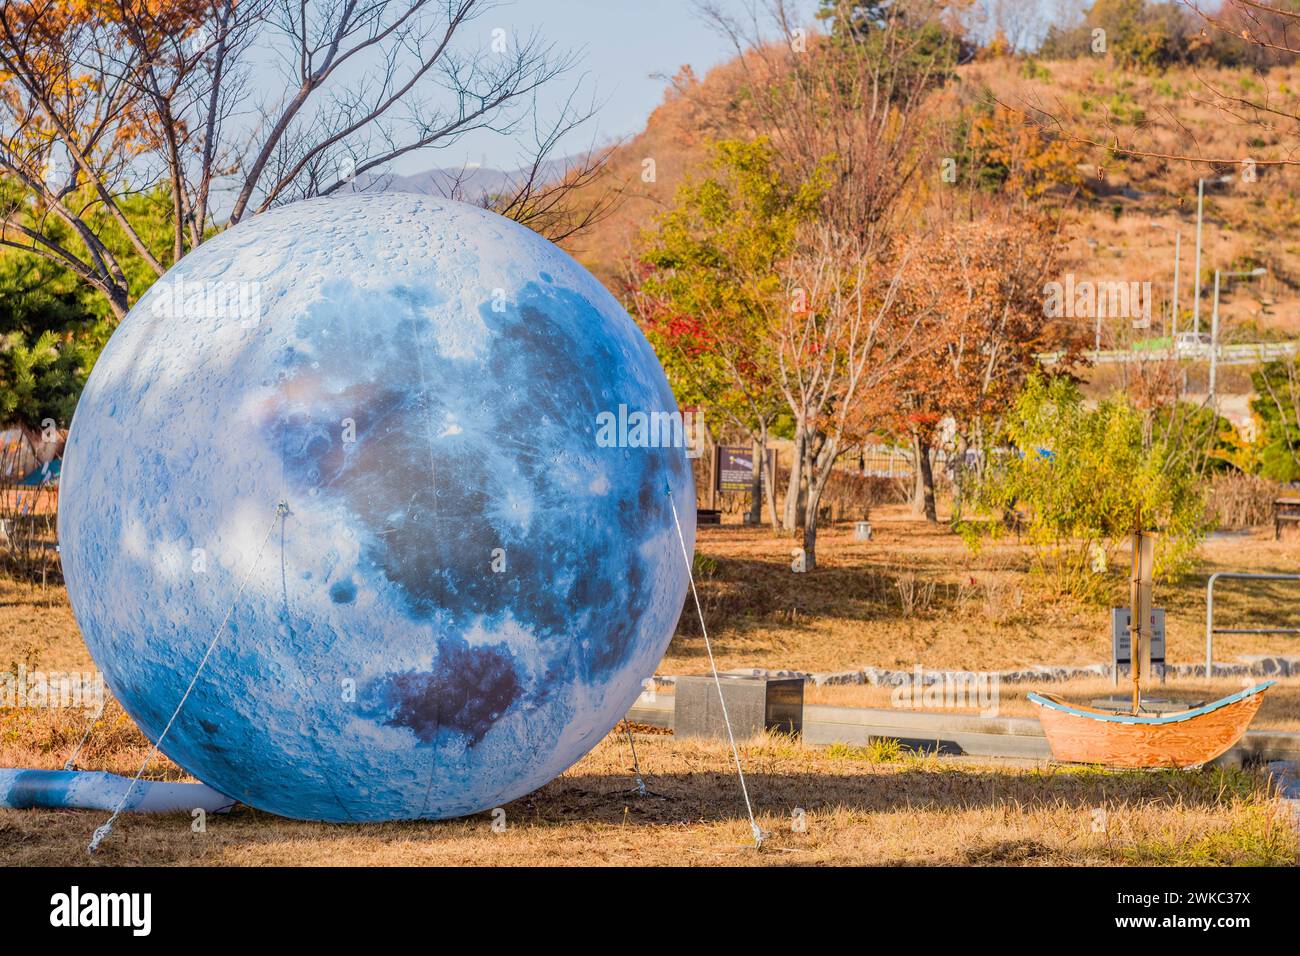 Large inflatable replica of moon in wilderness park in Pohang, South Korea Stock Photo